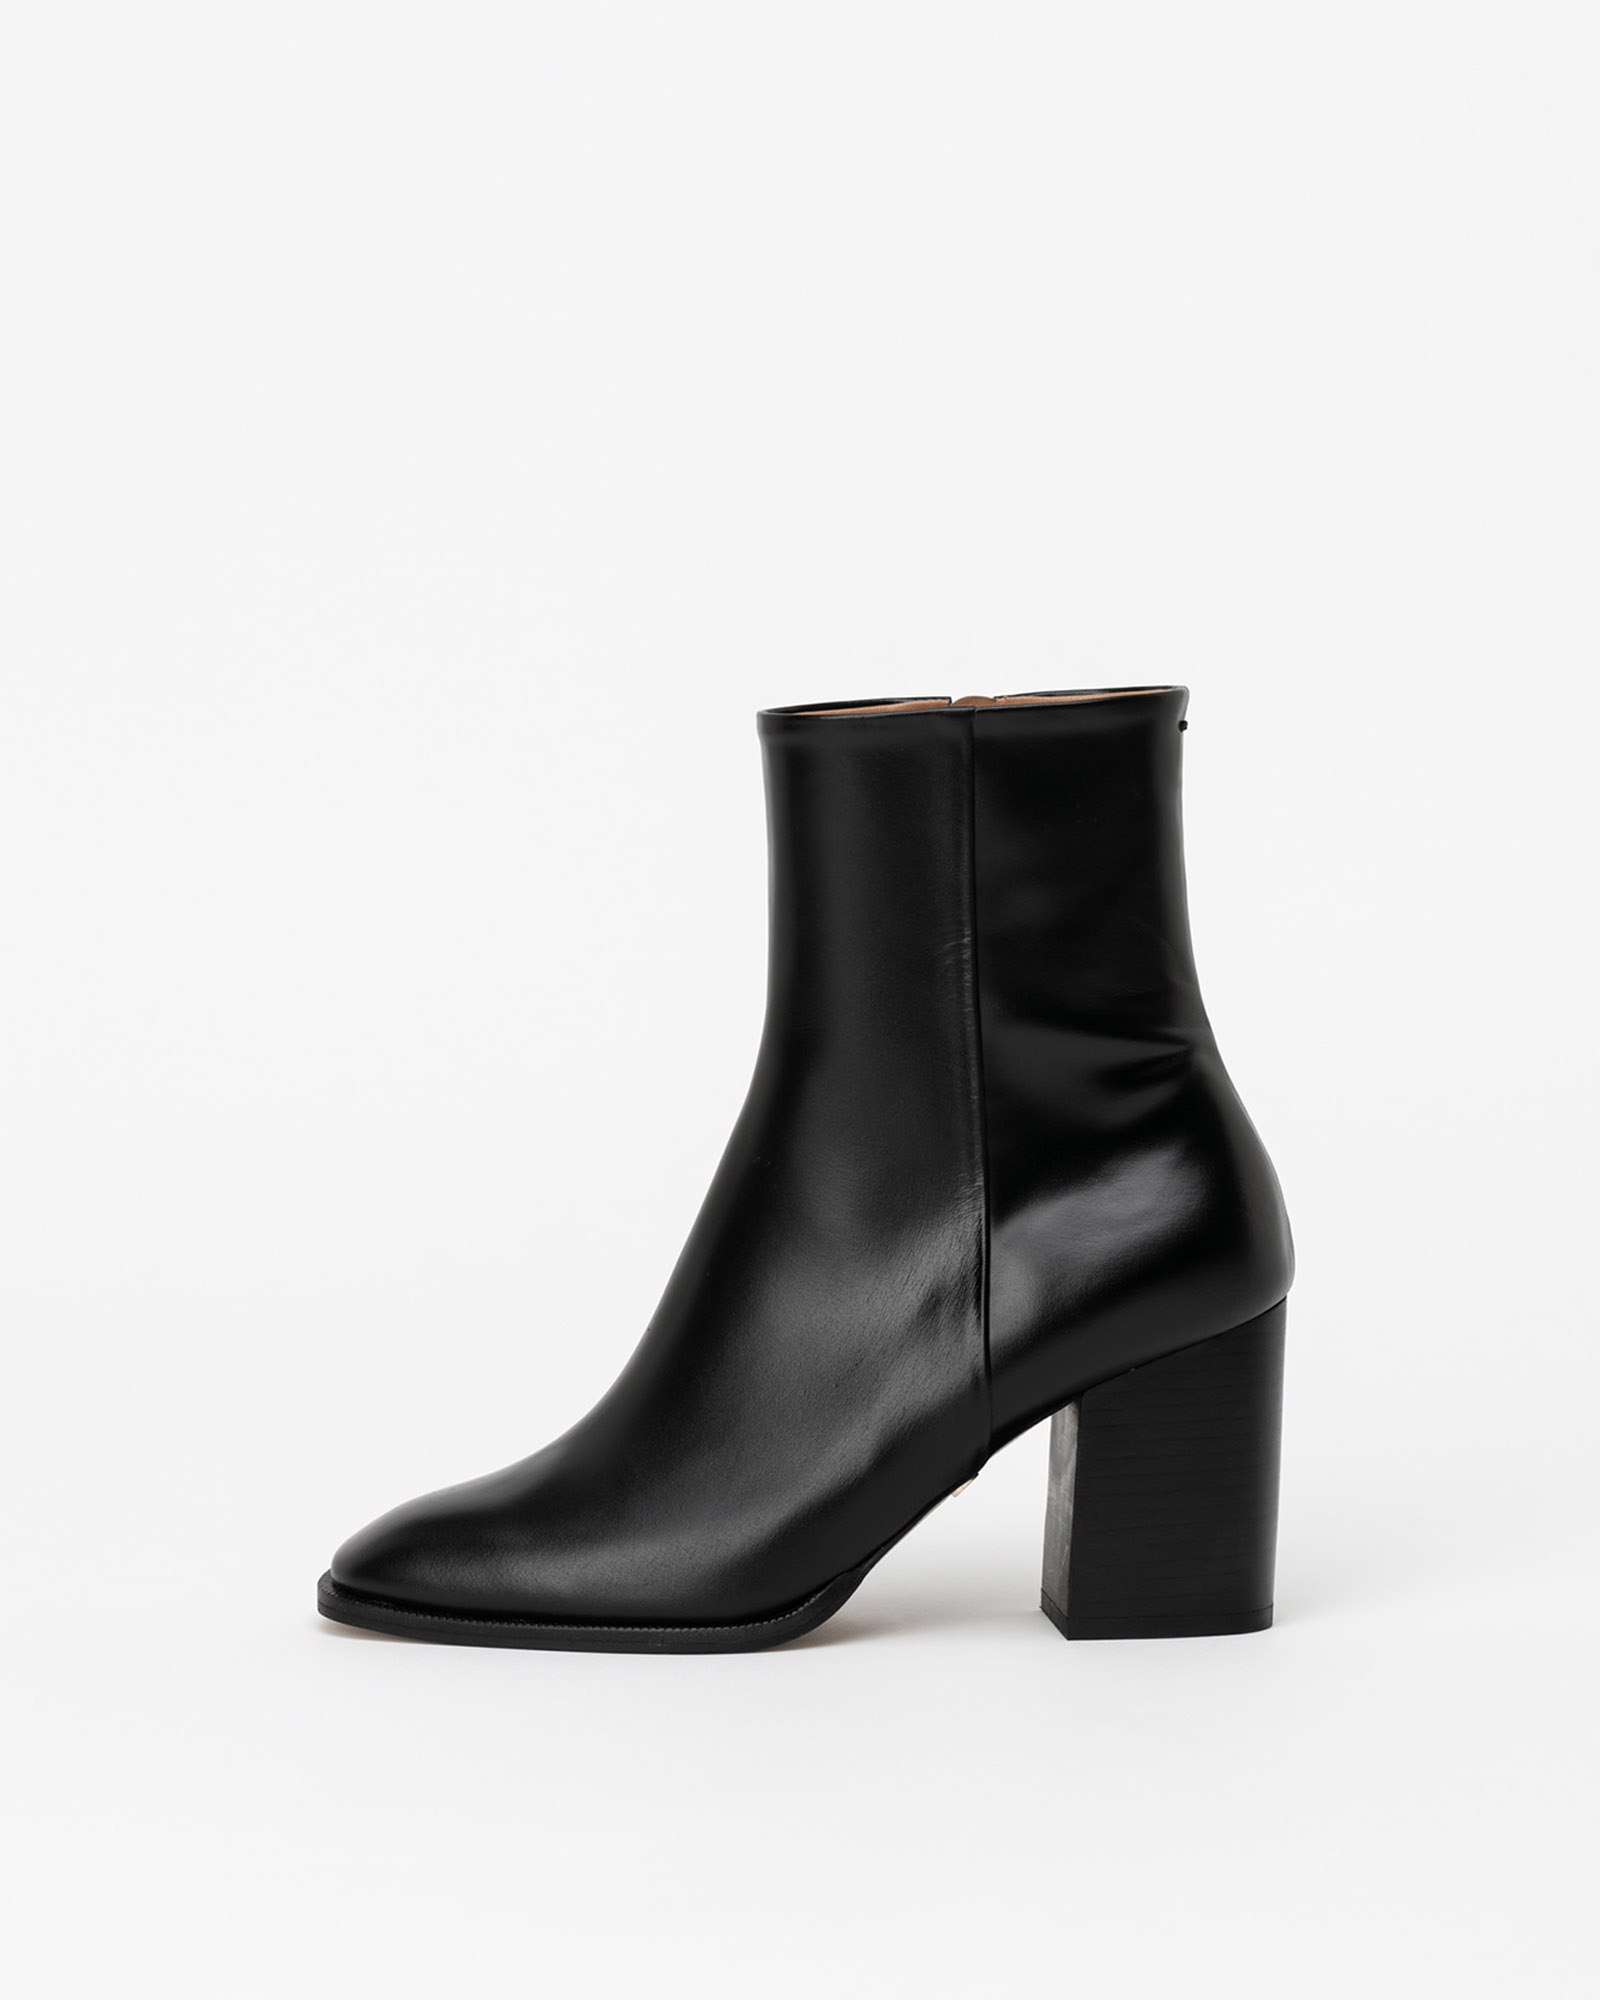 Venista Boots in Black